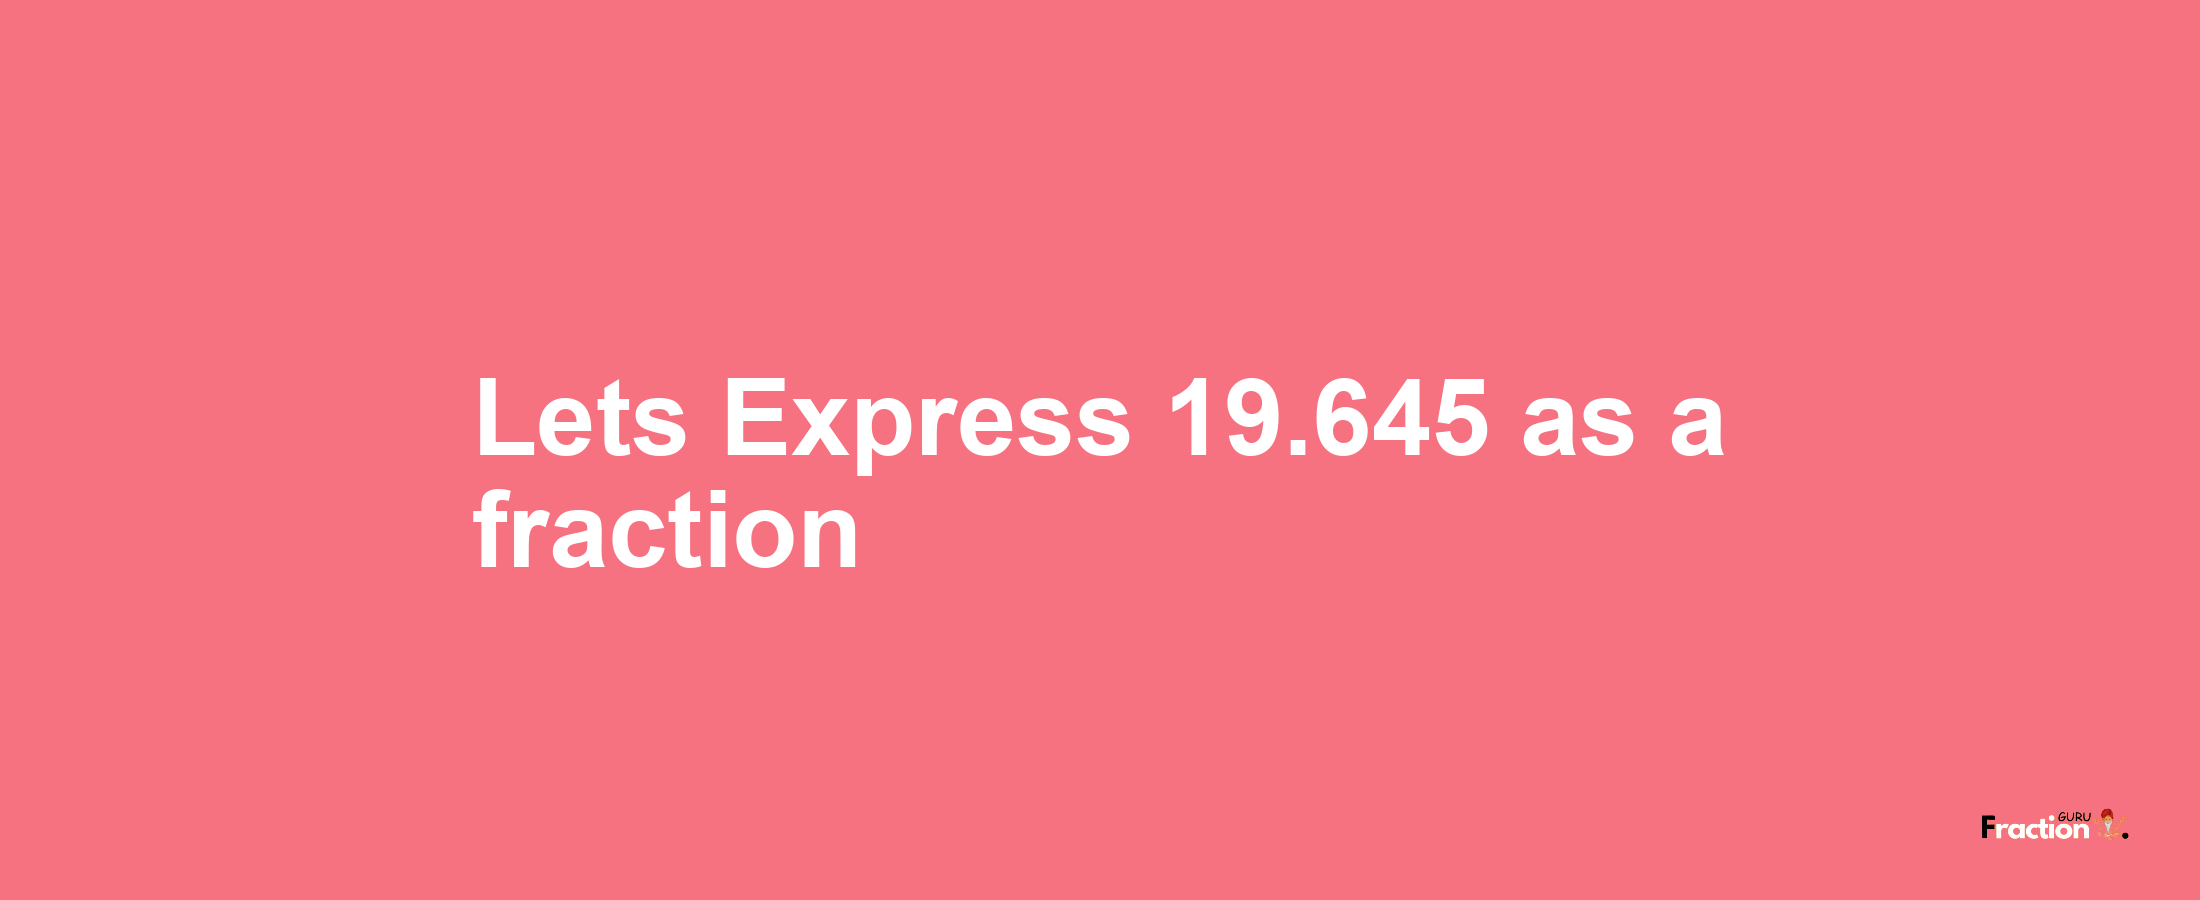 Lets Express 19.645 as afraction